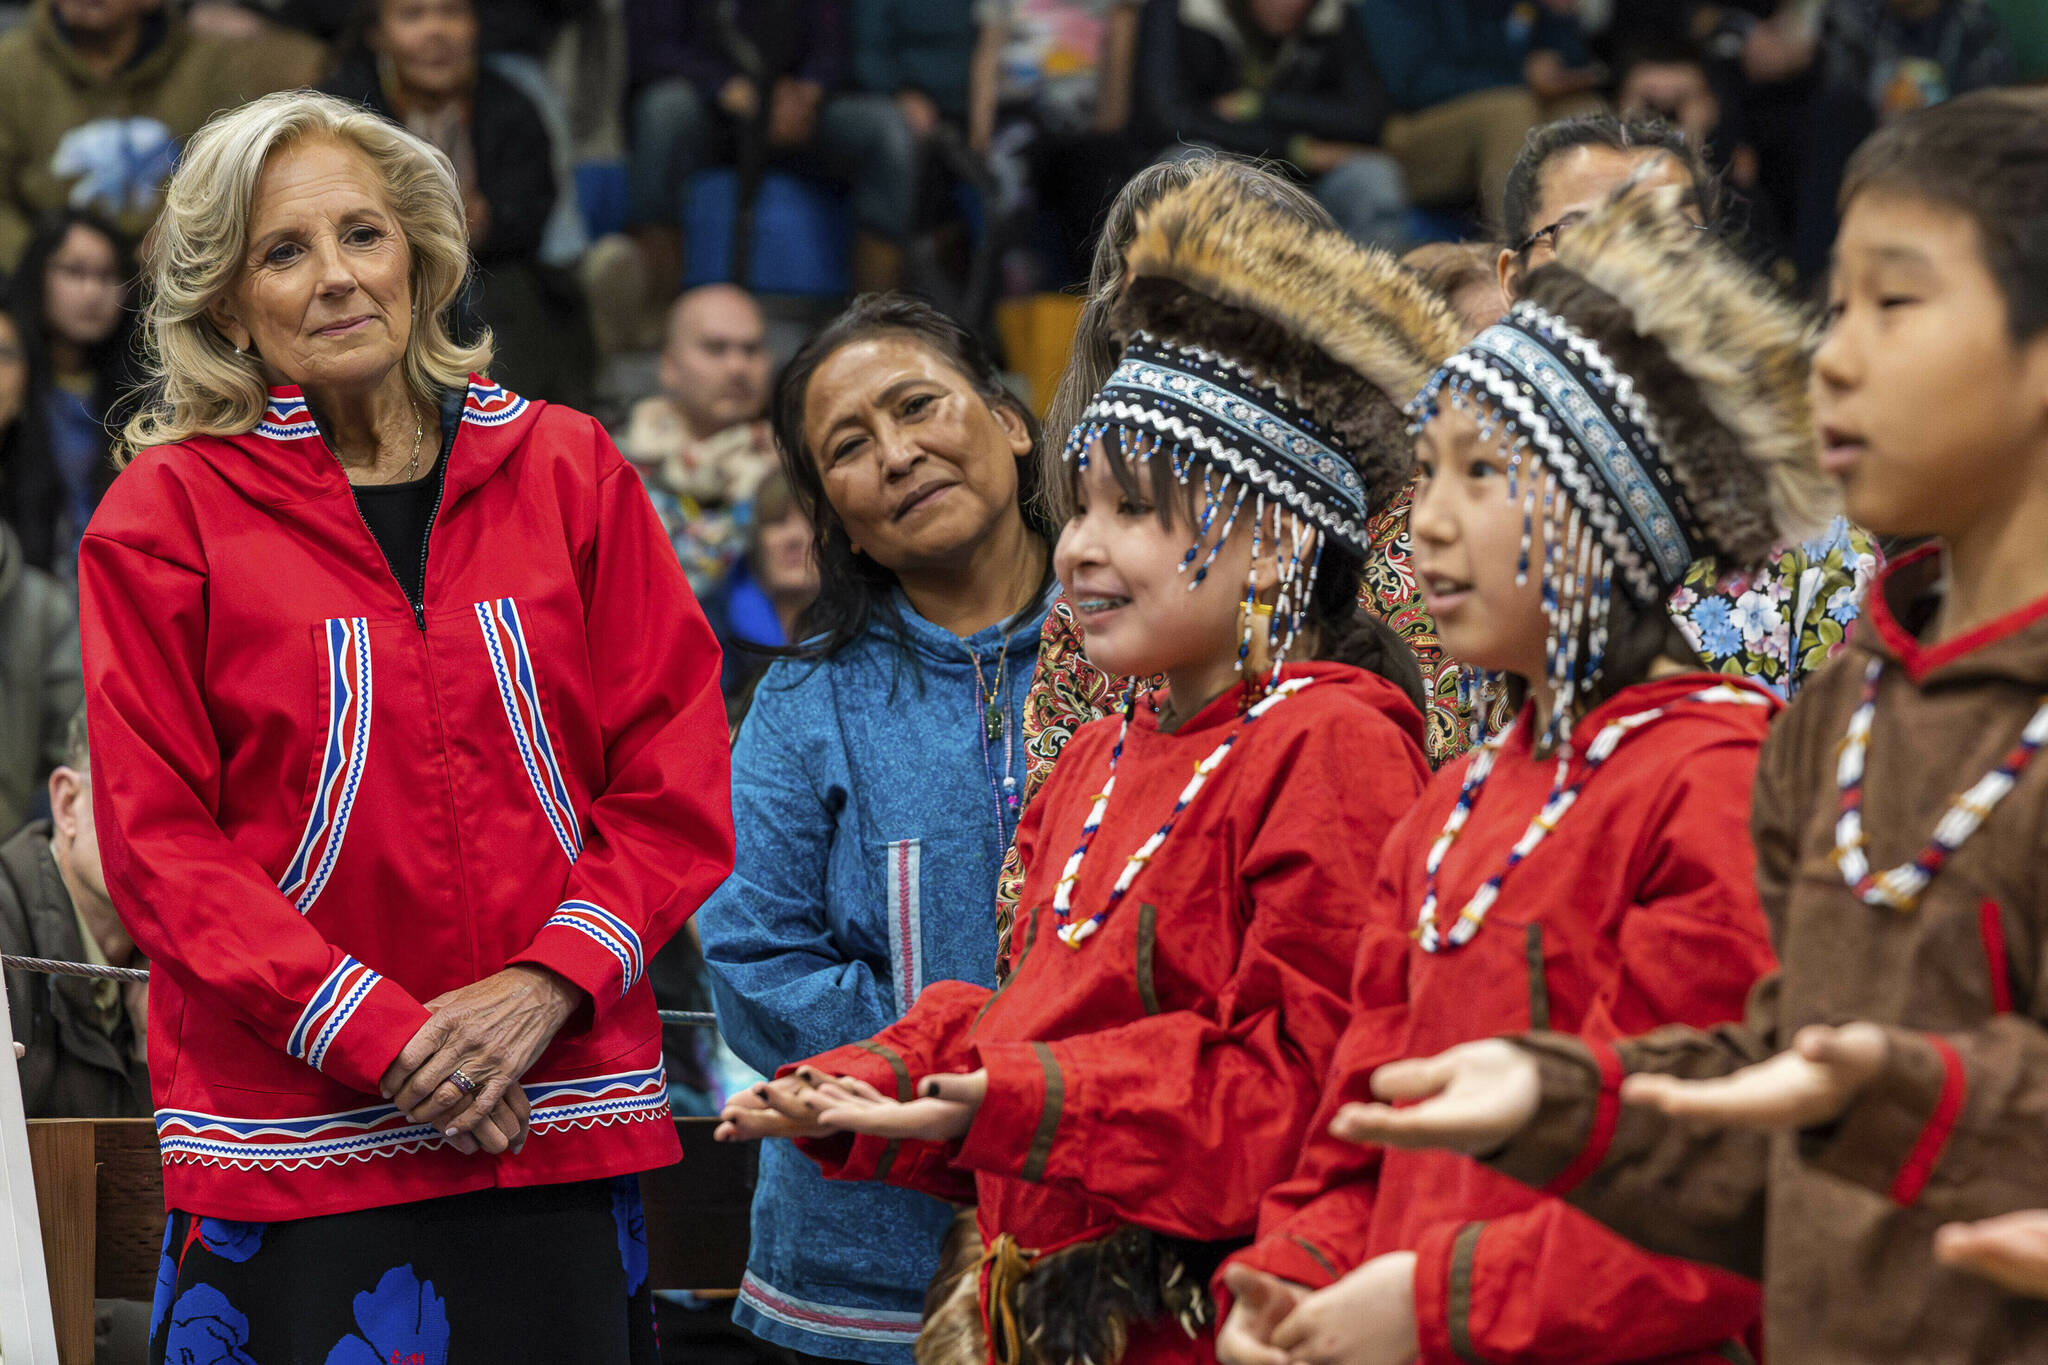 U.S. first lady Jill Biden, left, and first lady of Alaska Rose Dunleavy watch a performance by Ayaprun Elitnaurvik students during an event at Bethel Regional High School in Bethel, Alaska on Wednesday, May 17, 2023. Ayaprun Elitnaurvik is a Yugtun immersion school in Bethel. Biden and Interior Secretary Deb Haaland traveled to Bethel to highlight the Biden-Harris administration's investments to expand broadband internet connectivity in Native American communities, including Alaska's Yukon-Kuskokwim Delta. (Loren Holmes/Anchorage Daily News via AP)